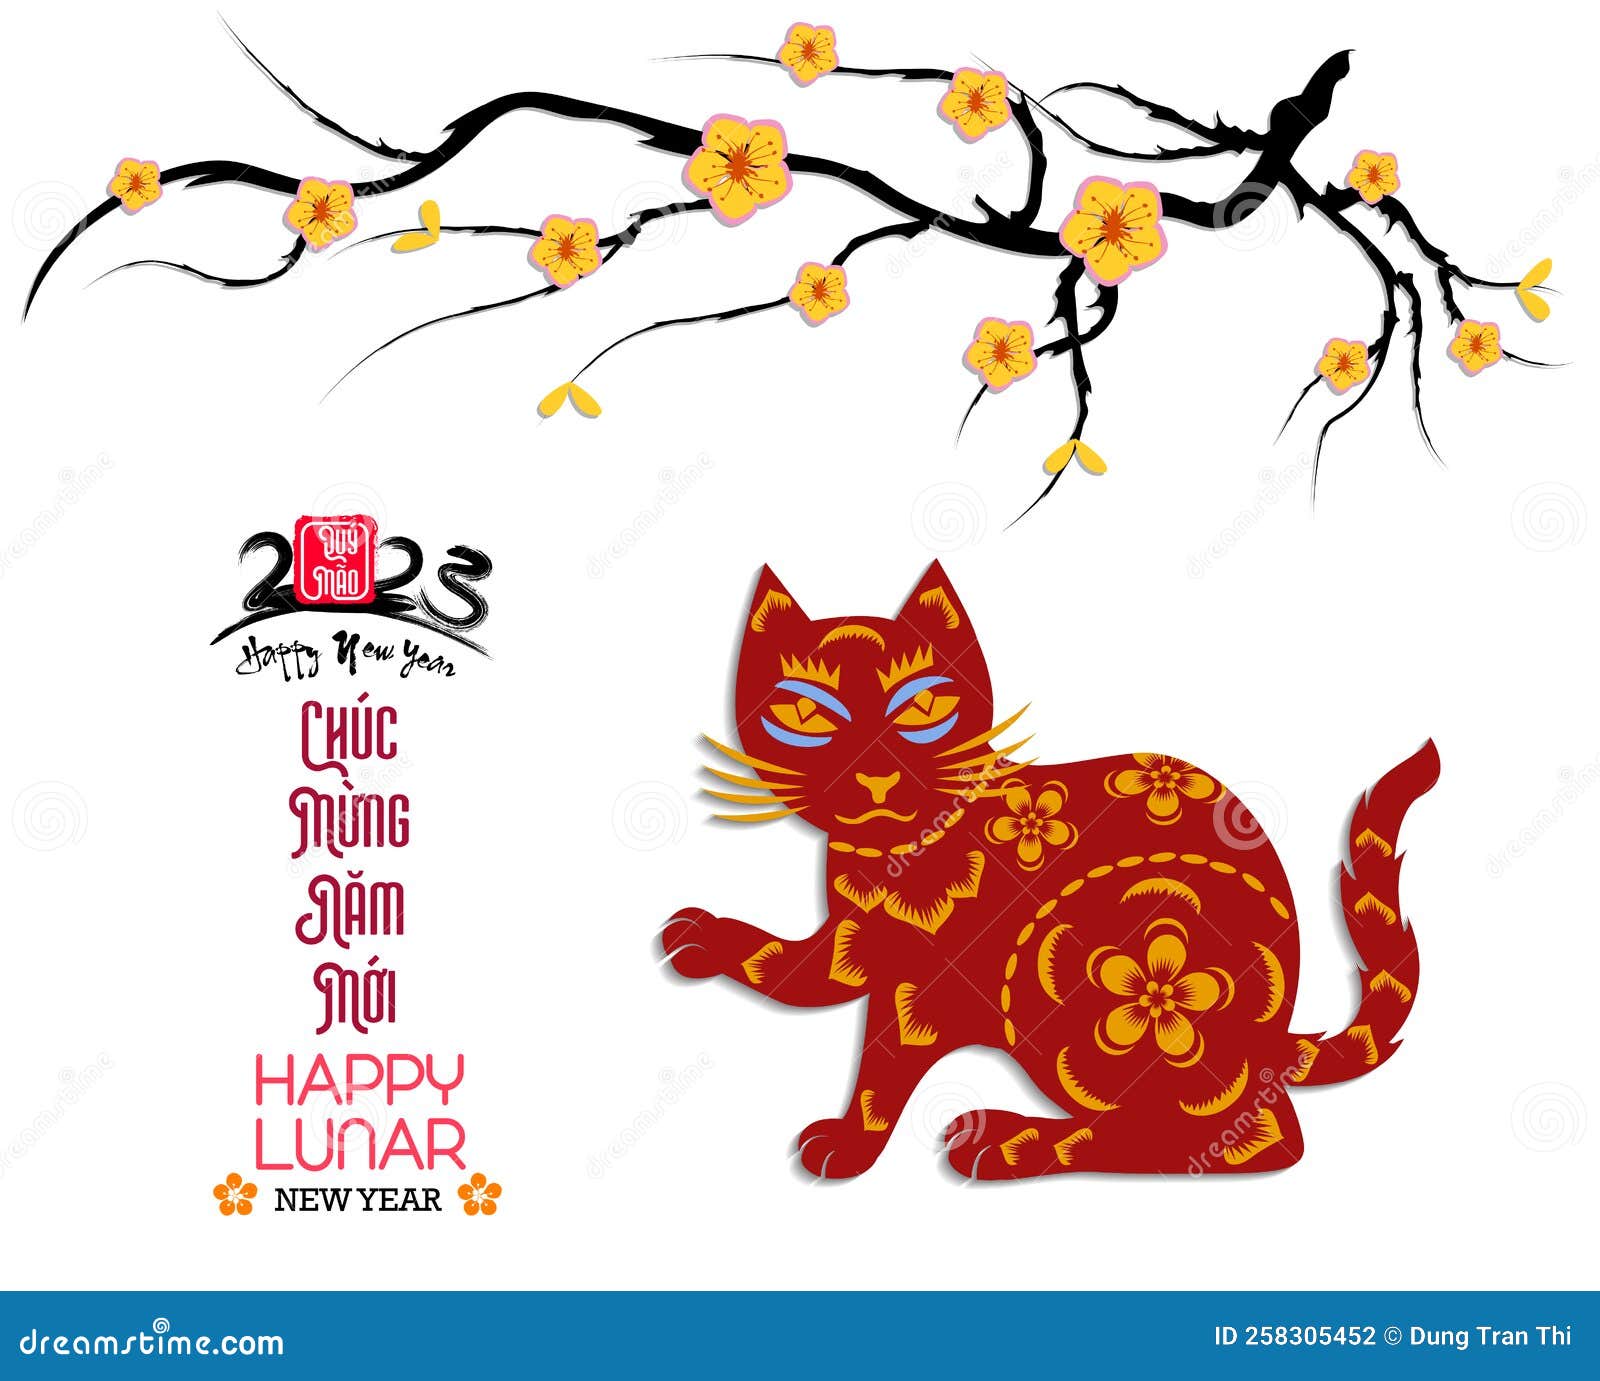 Happy Lunar New Year 2023, Vietnamese New Year, Year of the Cat Stock